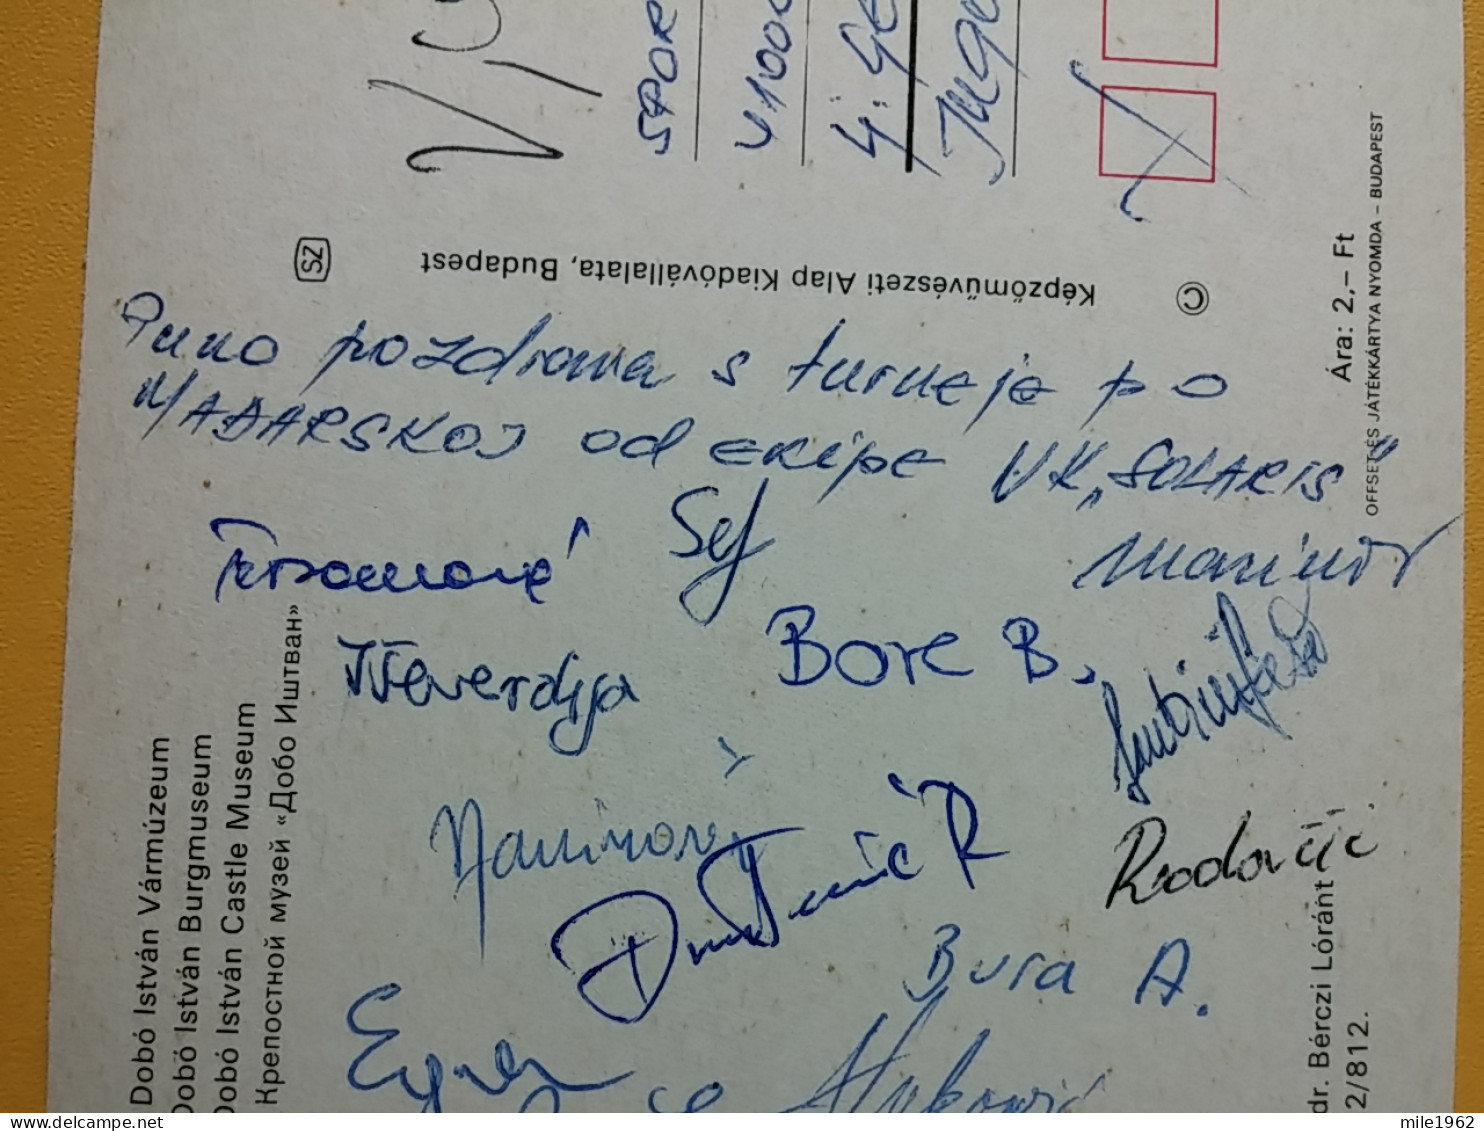 Kov 716-32 - HUNGARY, EGER, MUSEUM, MUSEE, WATER POLO CLUB SOLARIS AUTOGRAPH - Hungary